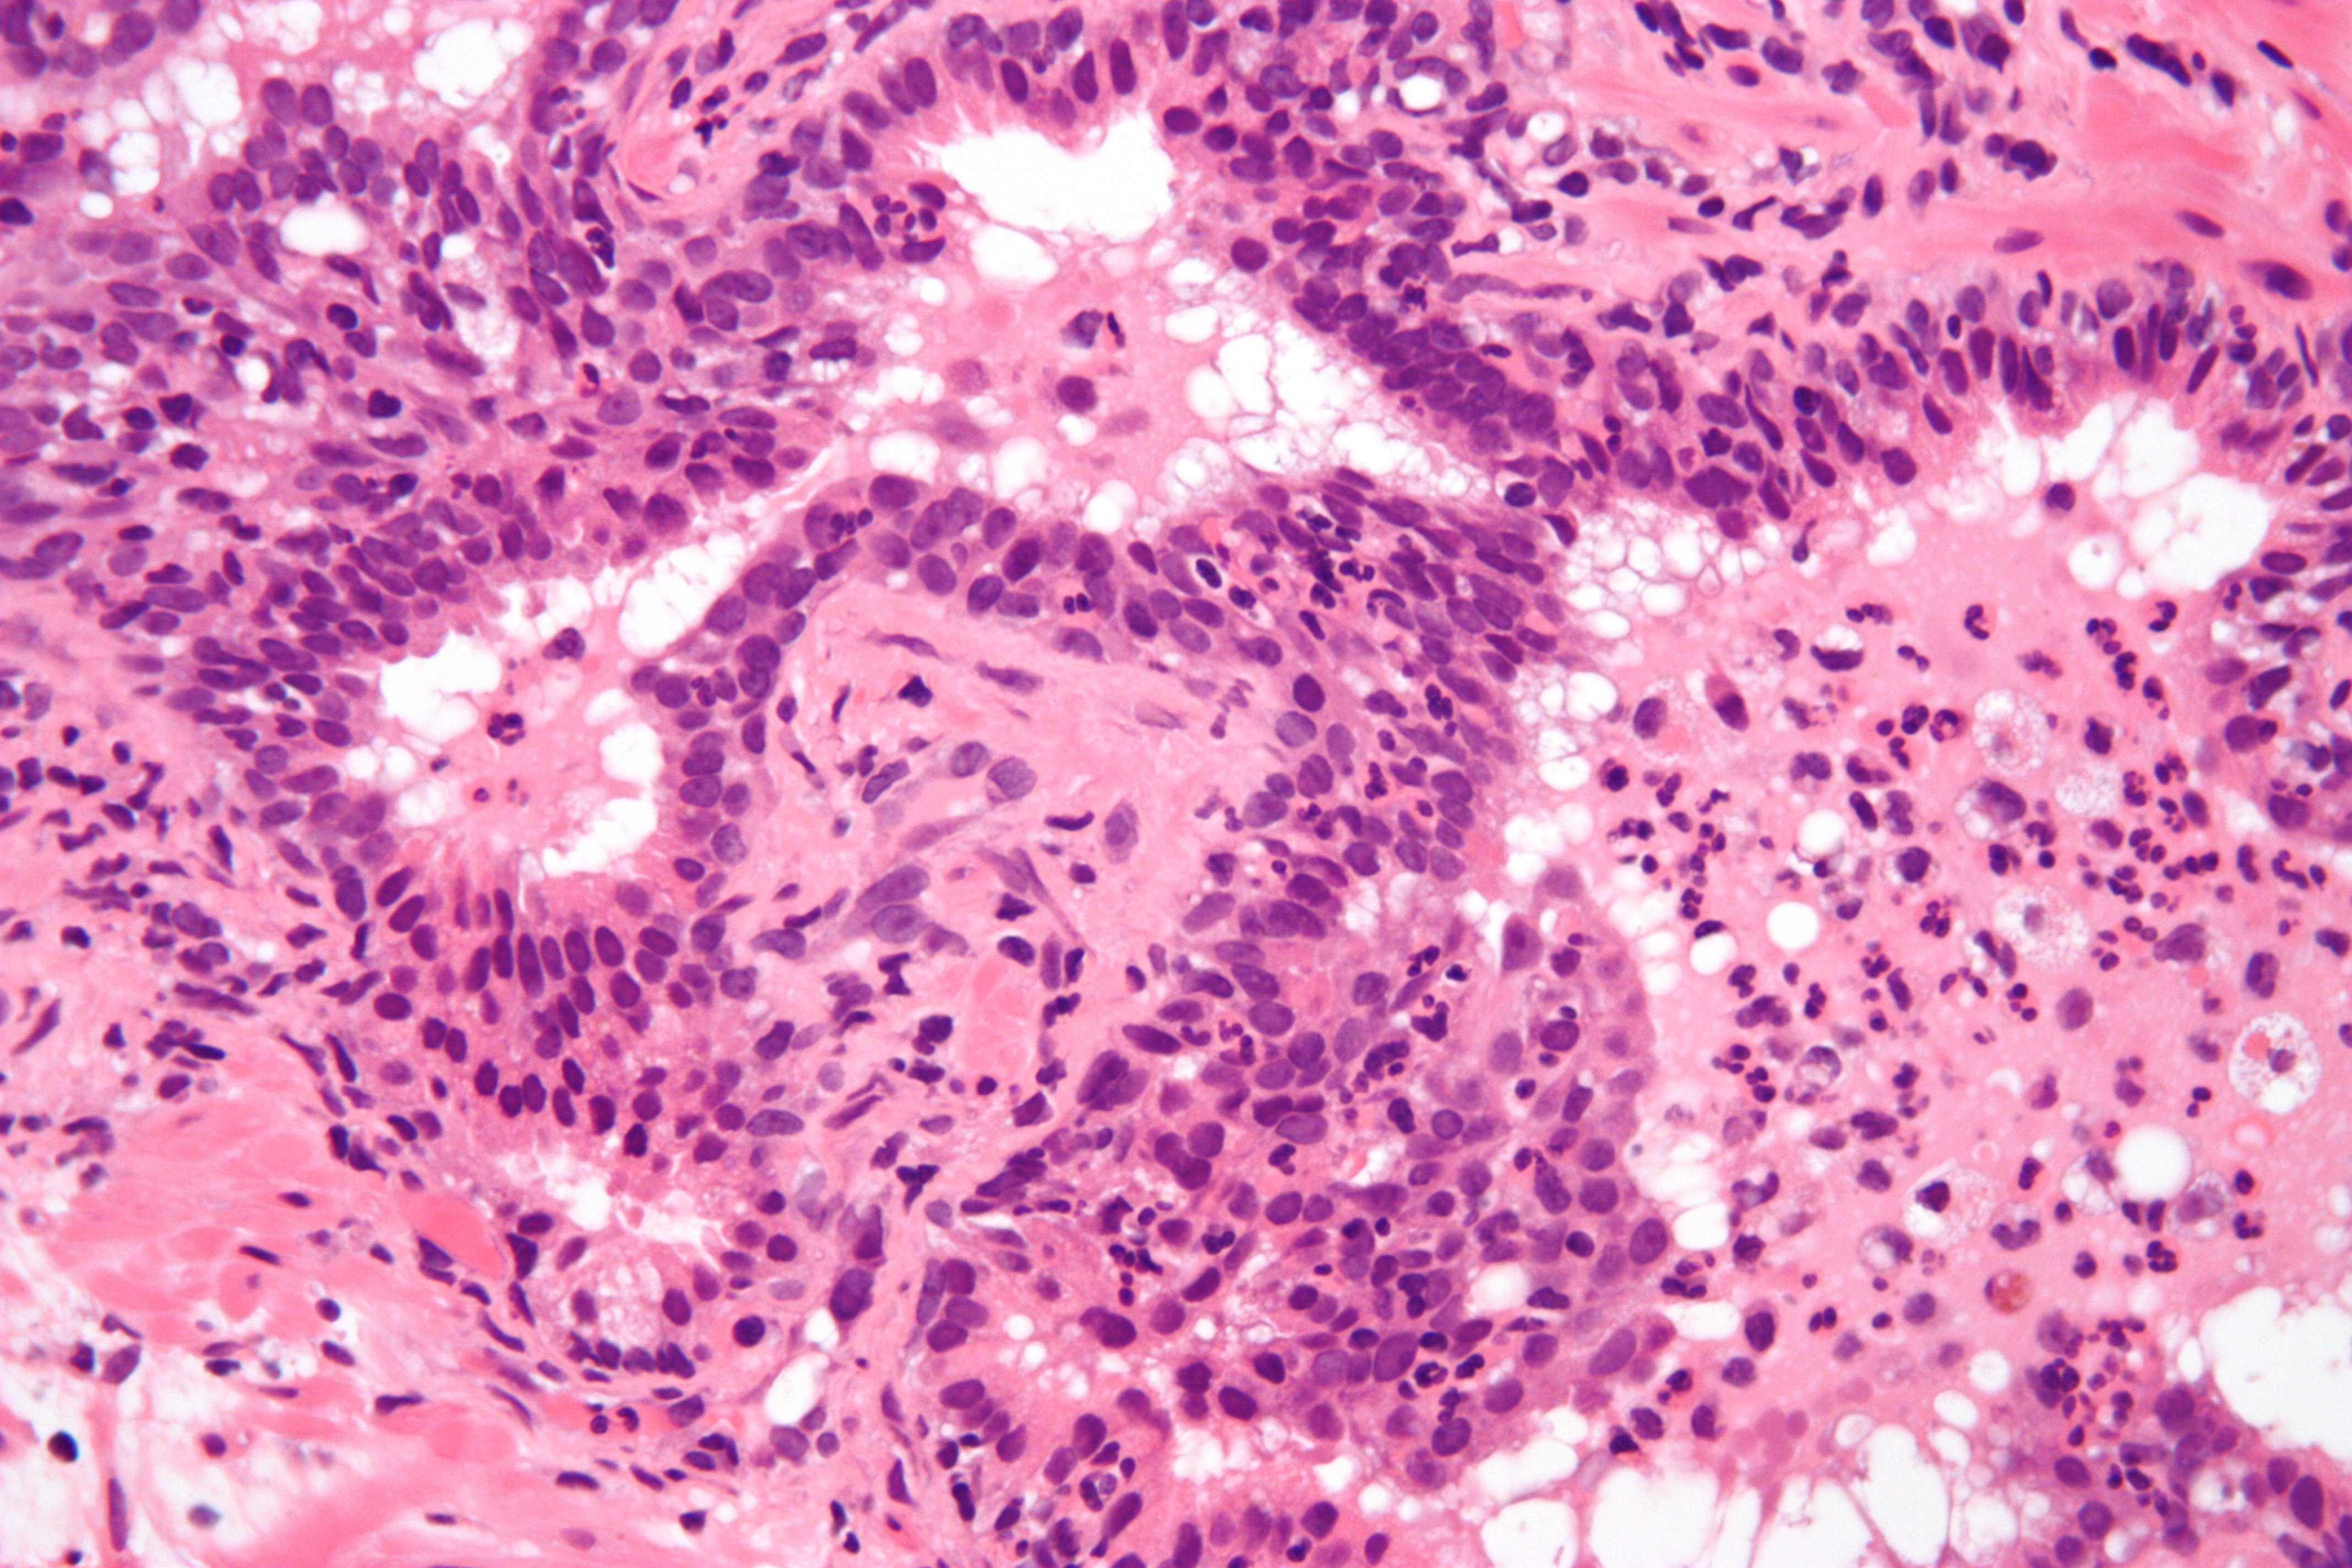 acute_inflammation_of_prostate